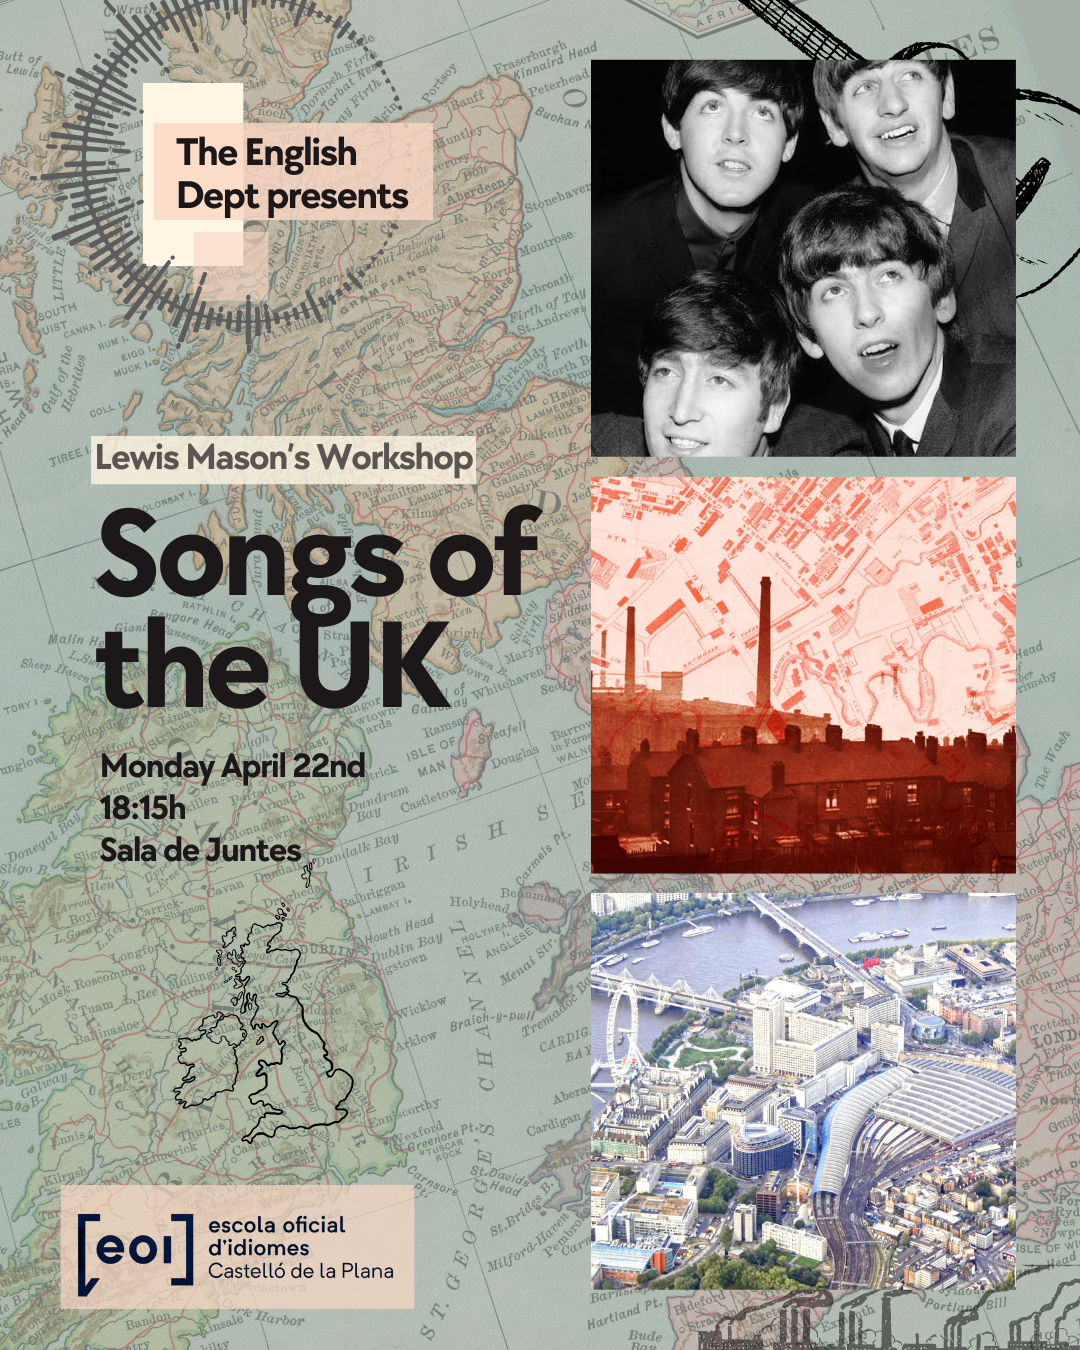 Songs_of_the_UK (1080 x 1350 px)